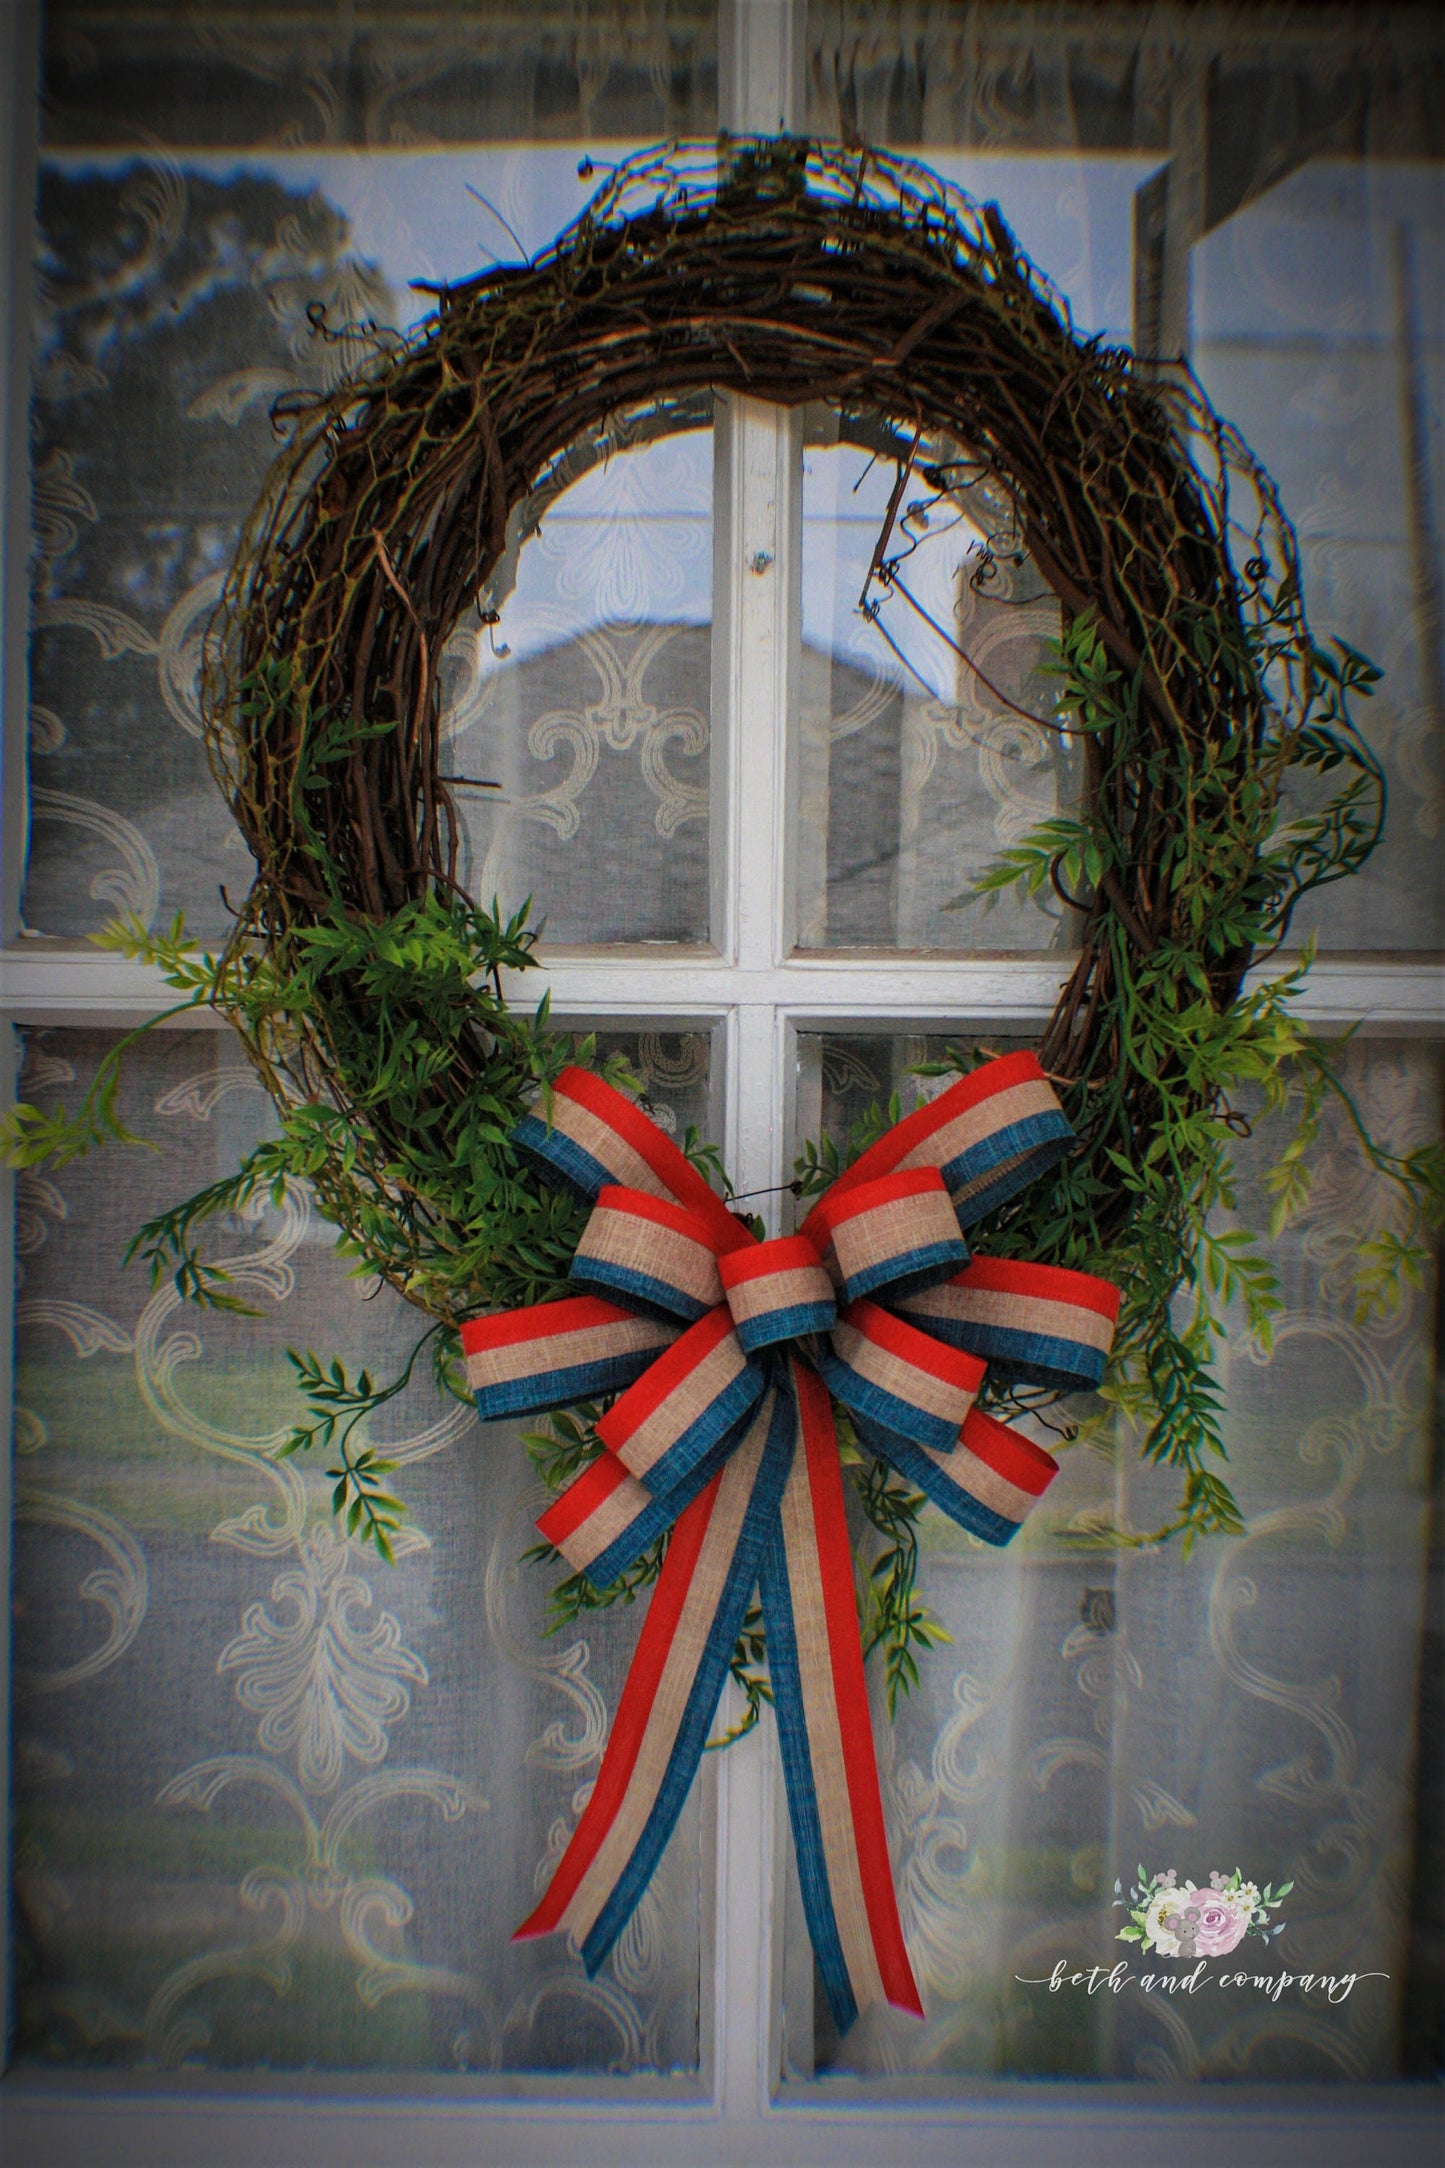 Patriotic Theme Linen Wreath Bow, Red Natural and Blue Wired Linen Wreath Bow, Linen Wreath Bow, Memorial Day Bow, Farmhouse Wreath Bow